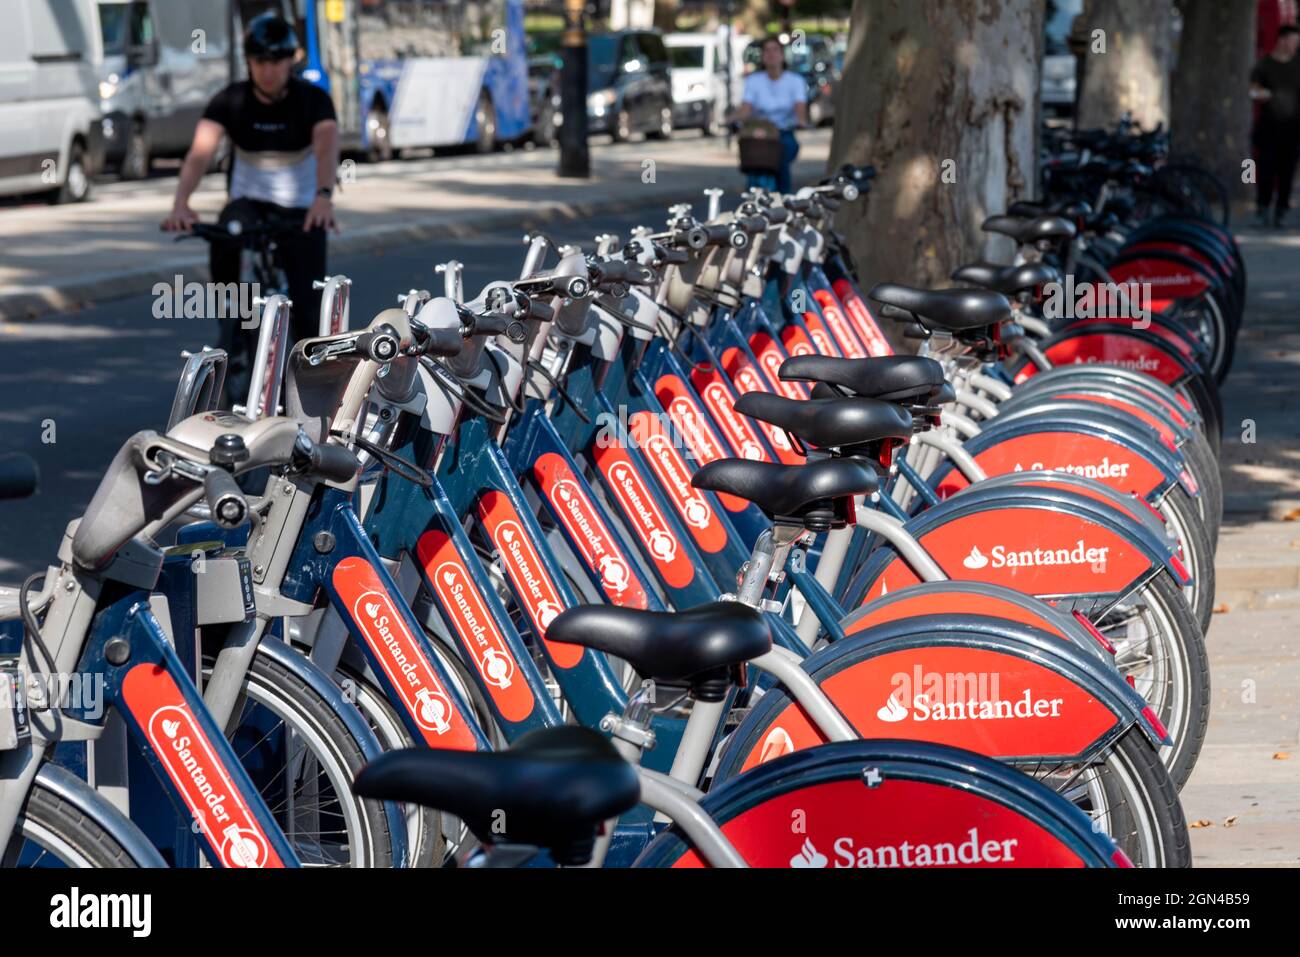 Santander Cycles in a docking station in Westminster, London, UK. Public bicycle hire scheme in the City of London, with cyclists in cycle lane Stock Photo